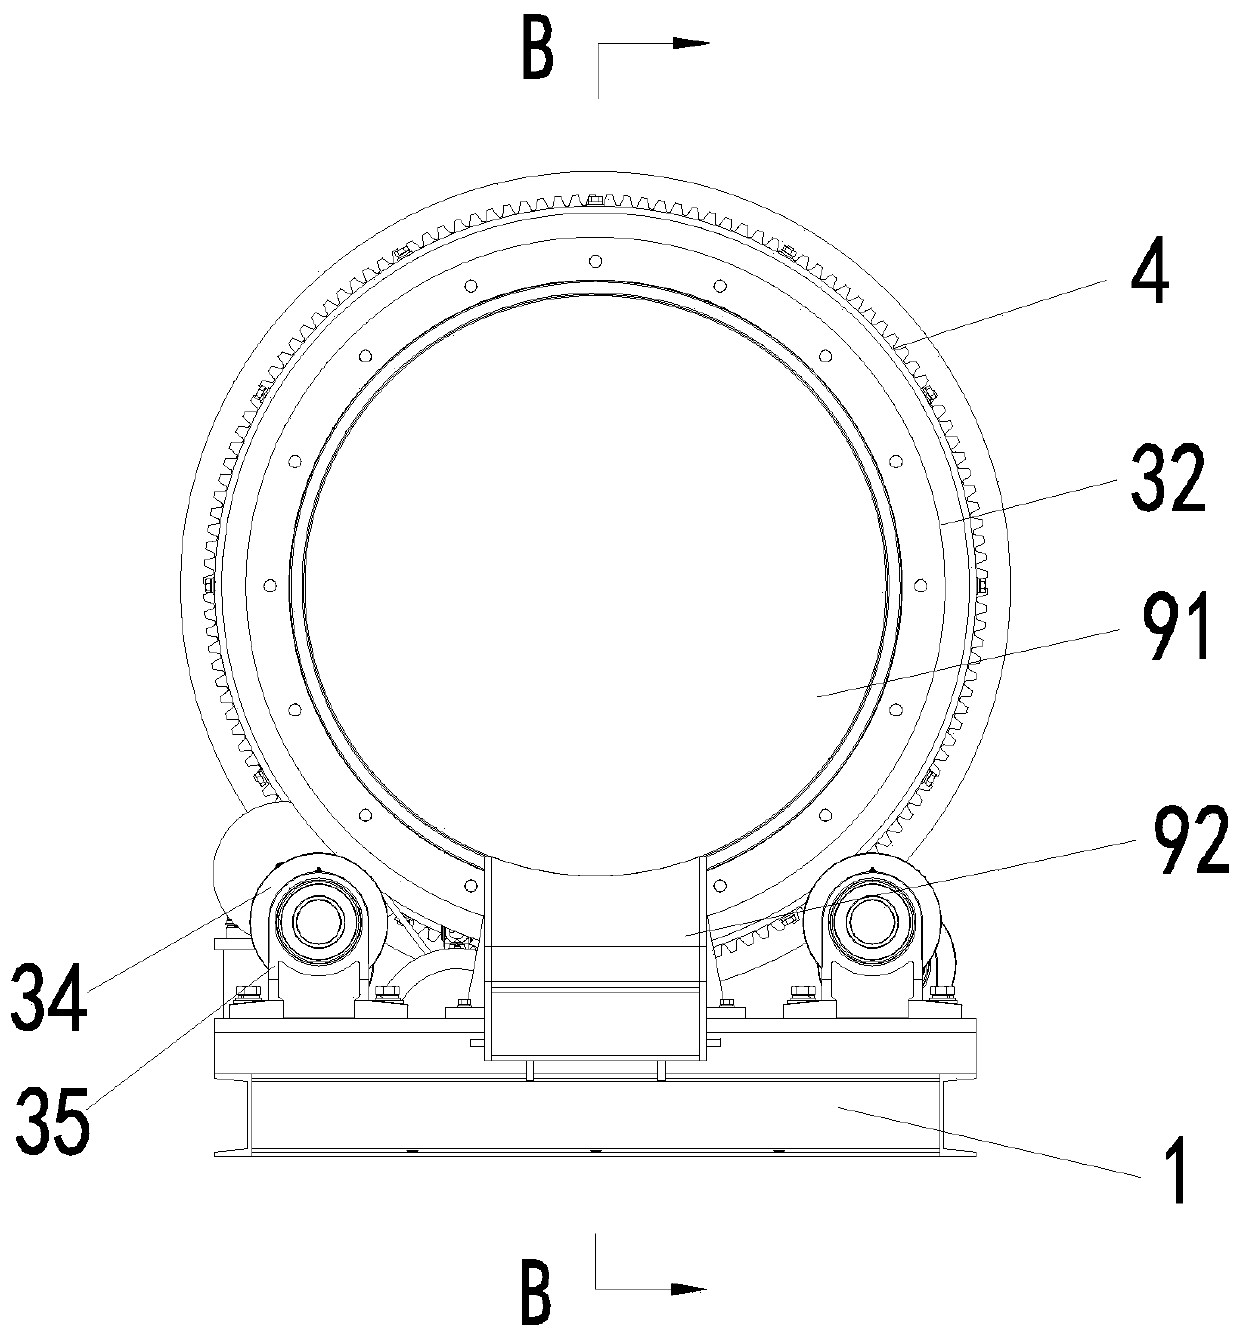 Continuous type material mixing device